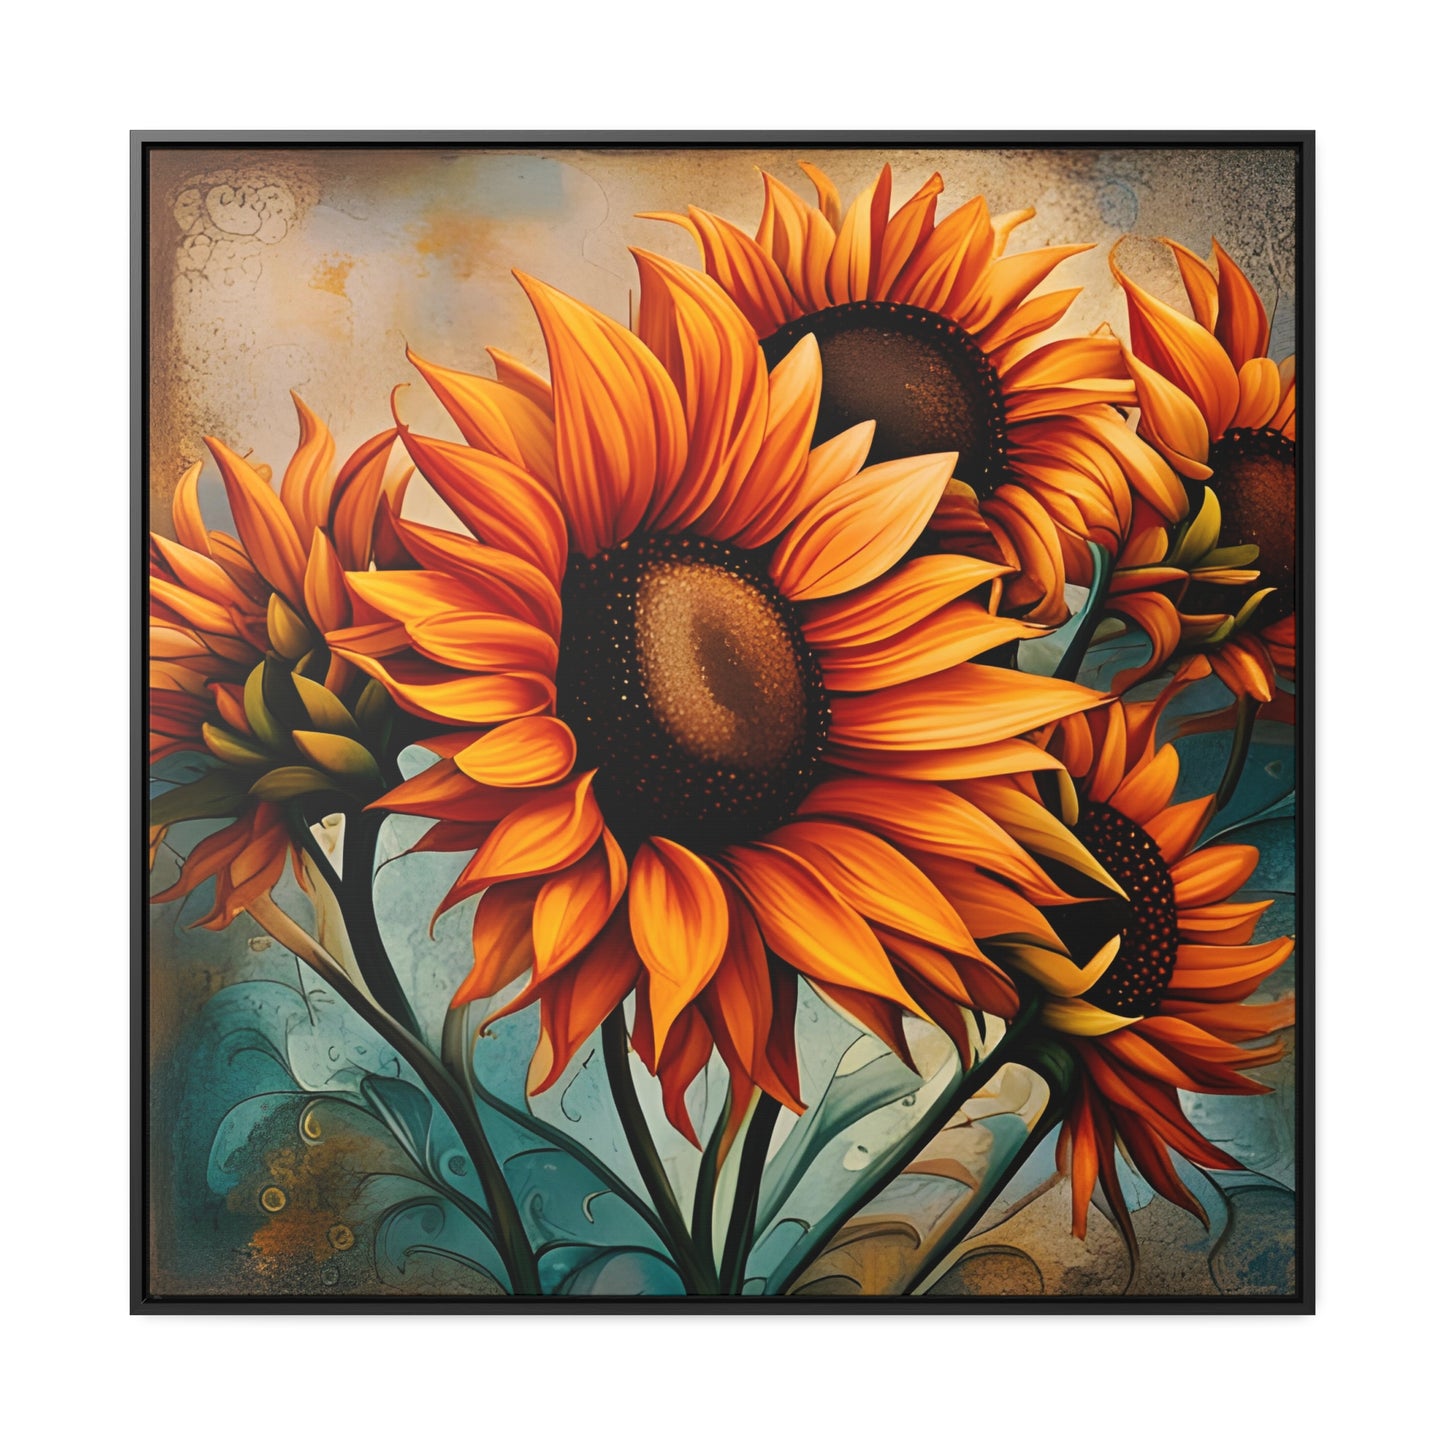 Sunflower Lovers Delight - Sunflower Crop on Distressed Blue and Copper Background Printed on Canvas in a Floating Frame